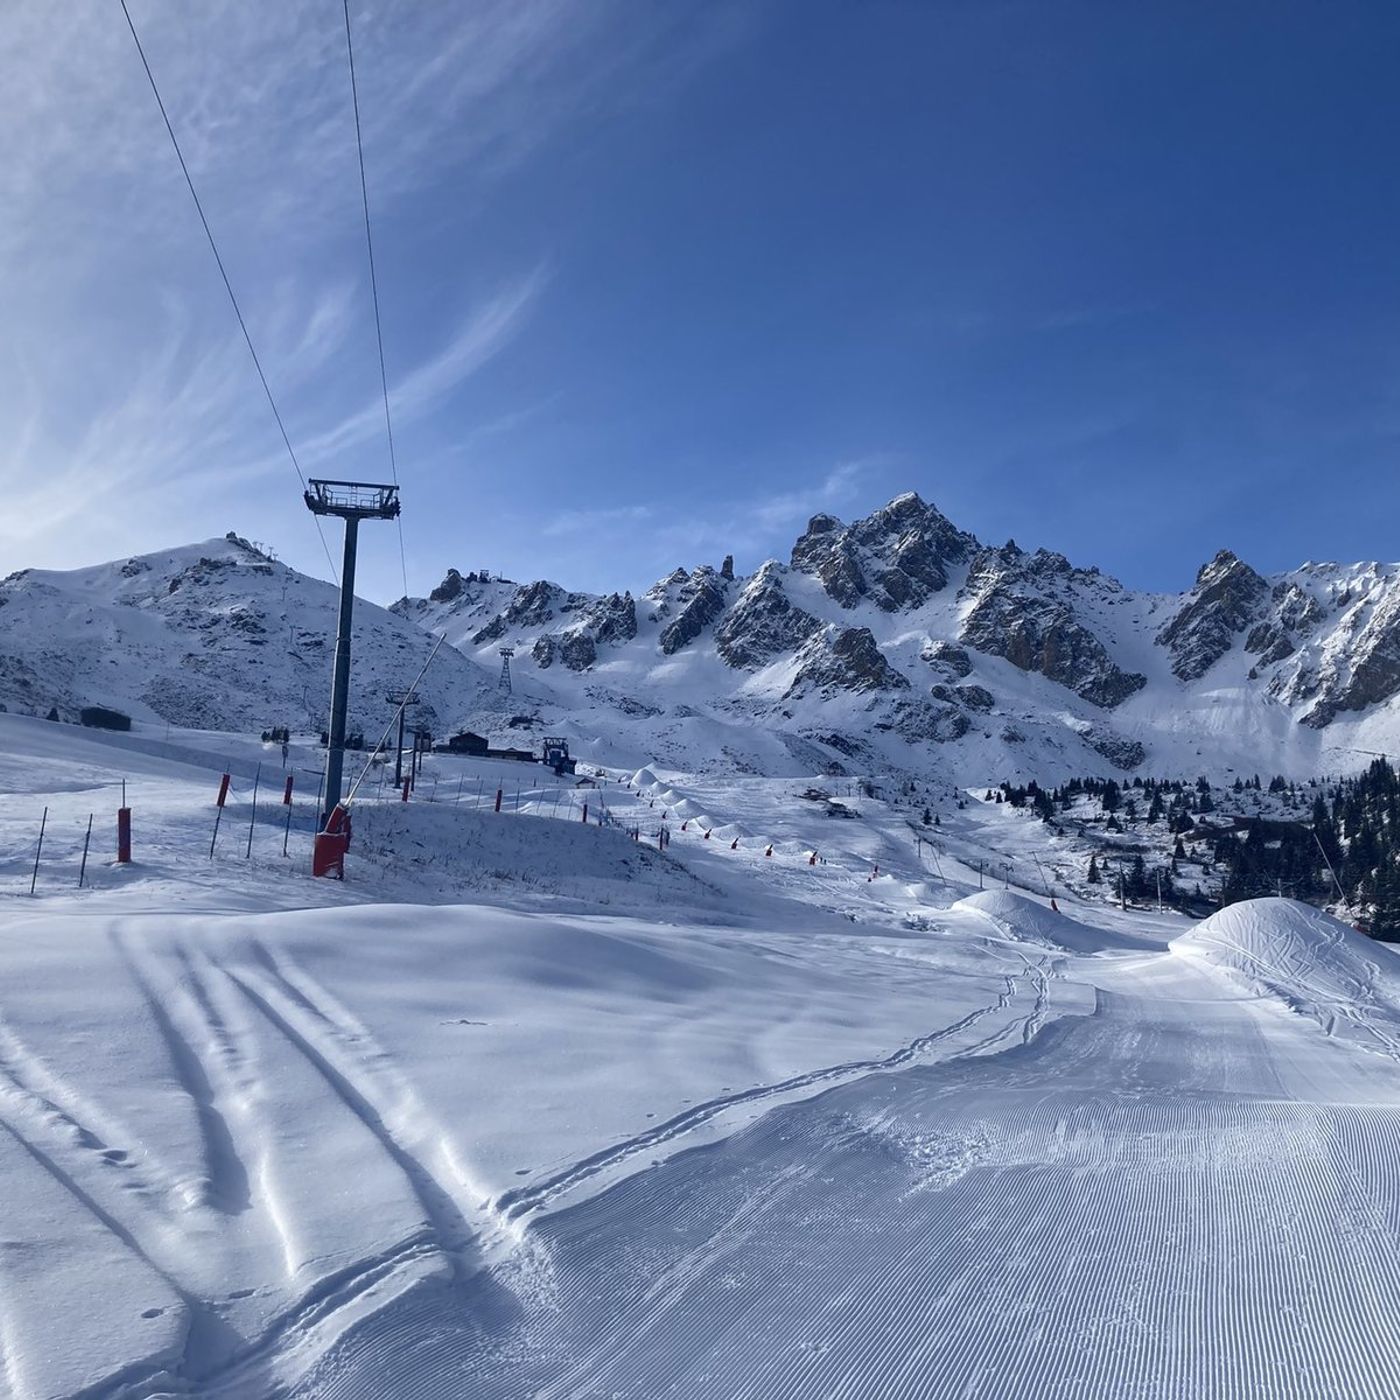 64.5: Your Christmas Update From The Alps